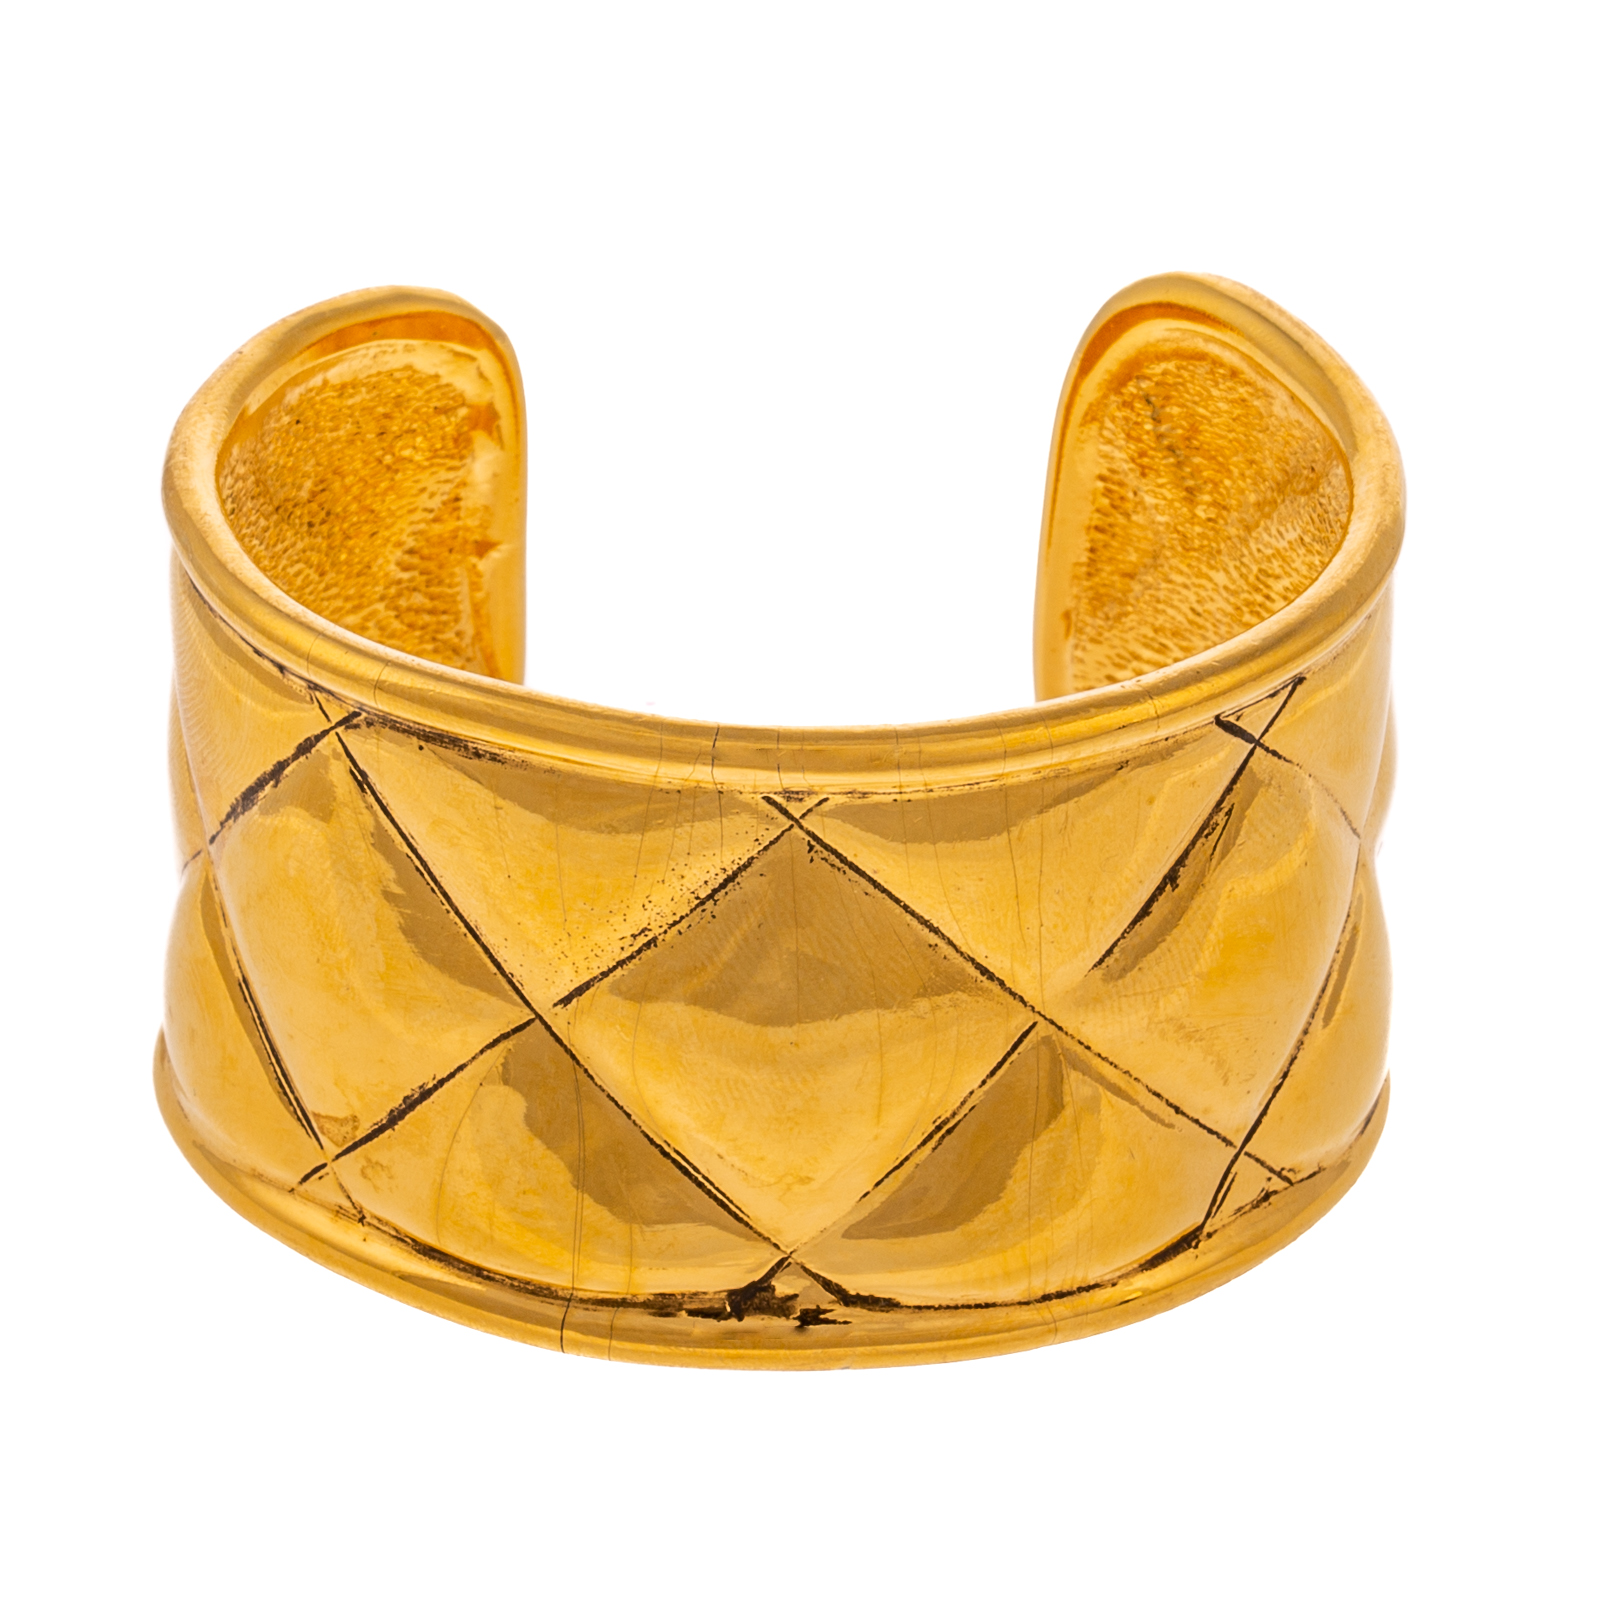 A CHANEL QUILTED CUFF BRACELET